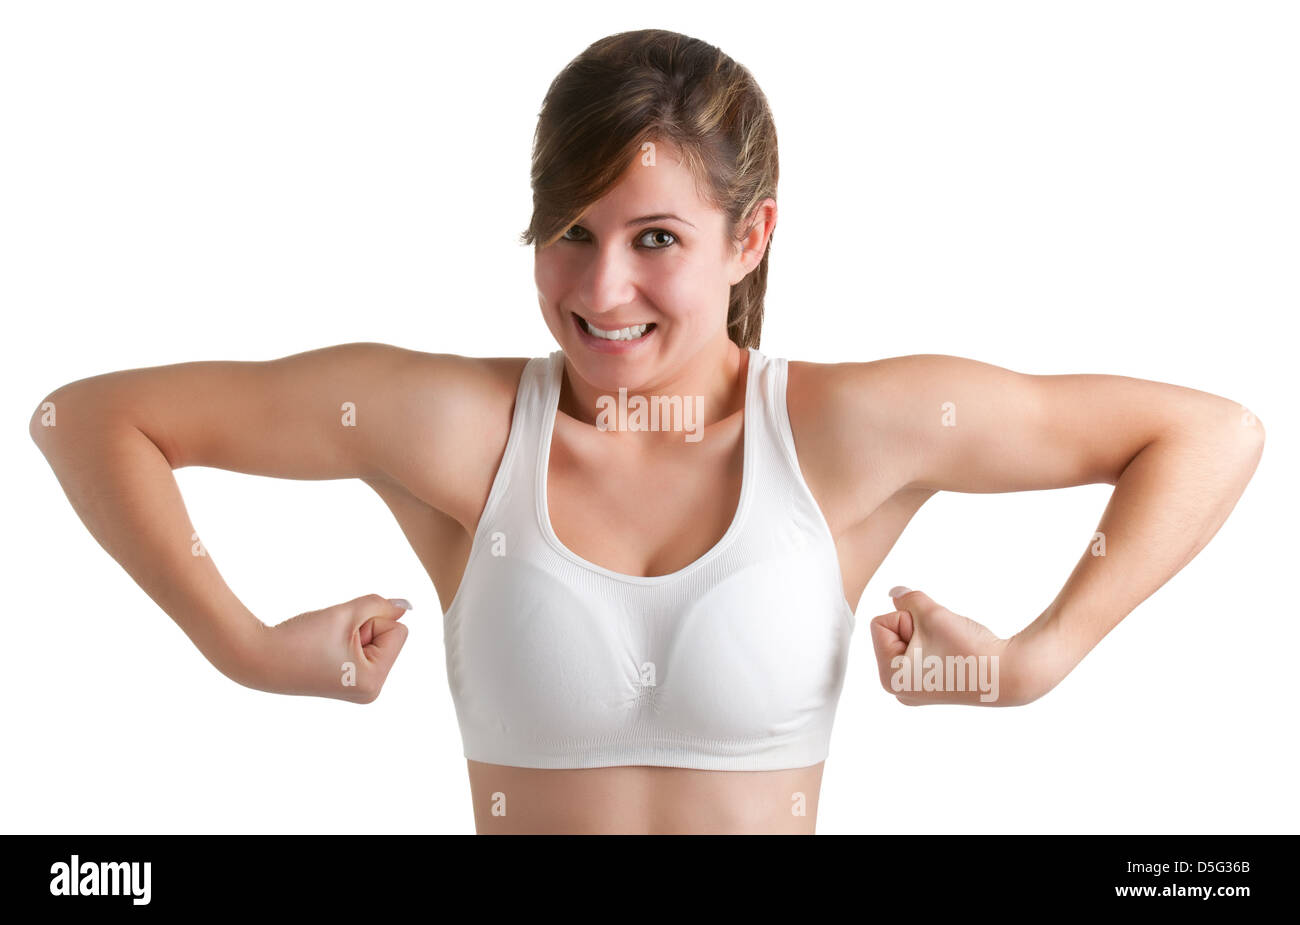 Funny female flexing her muscles, isolated in a white background Stock Photo